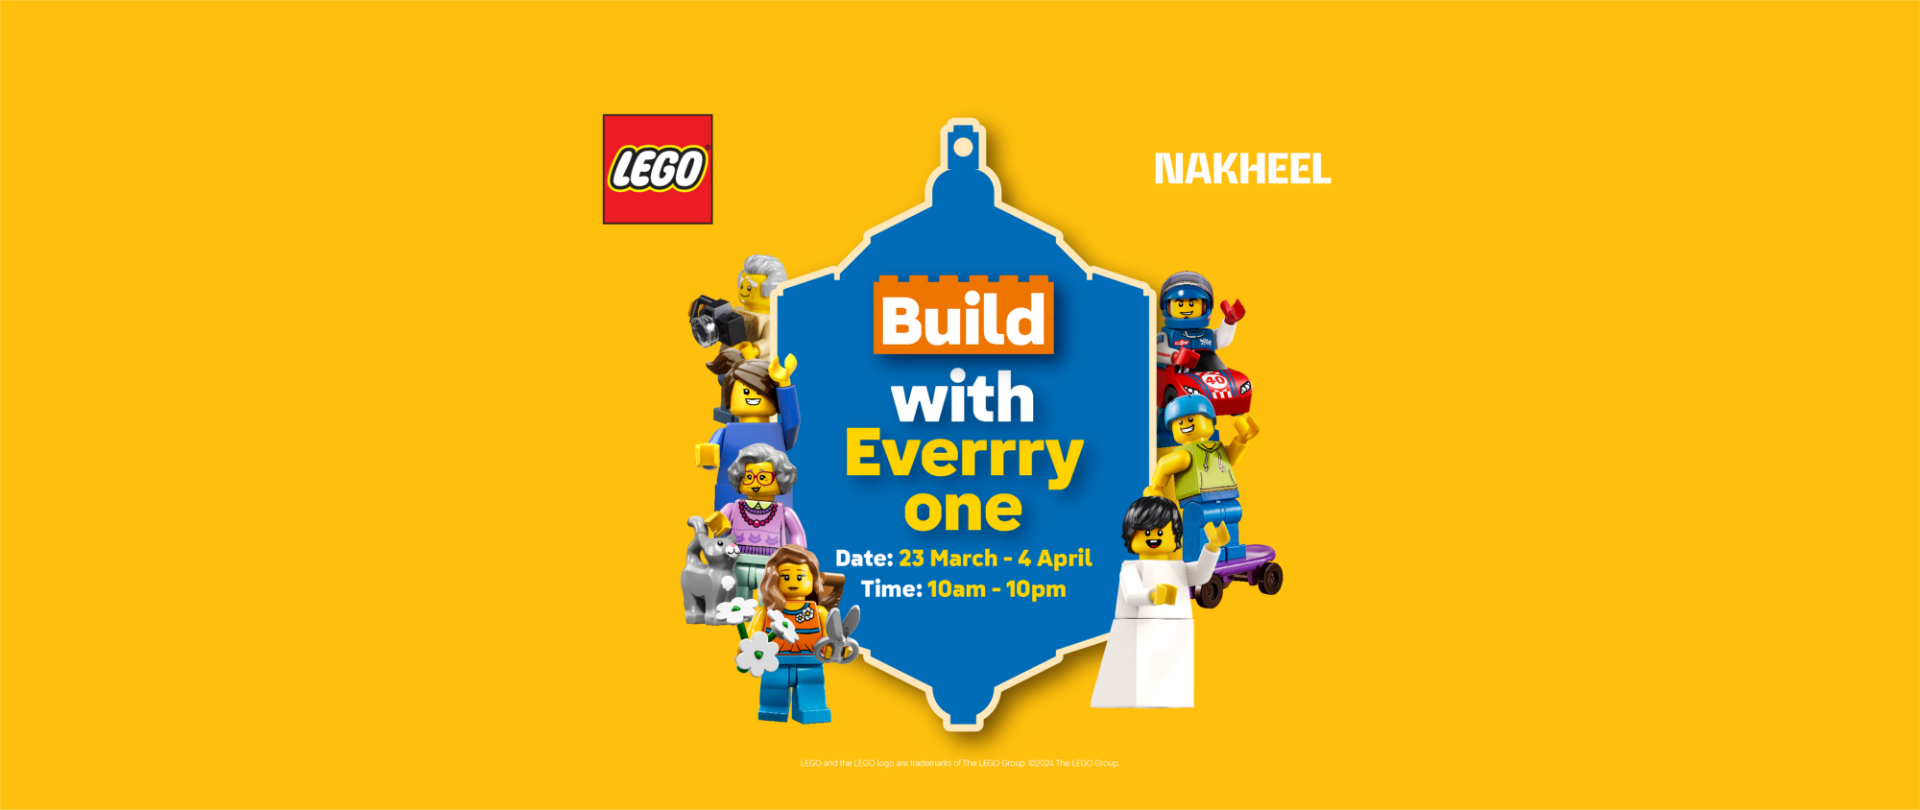 Get ready to #BuildwithEverrryone at Nakheel Mall this Ramadan